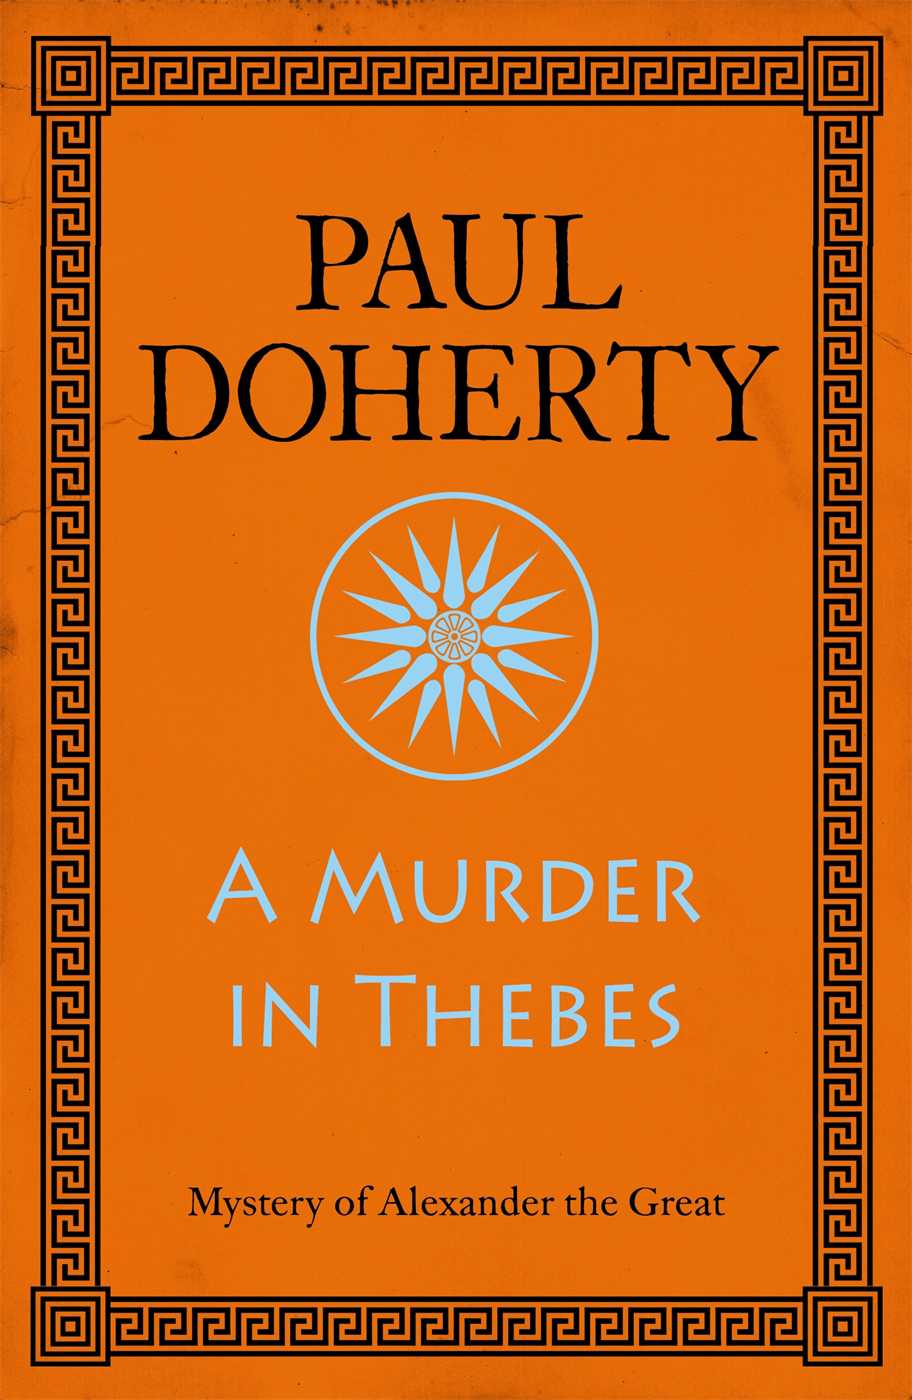 A Murder in Thebes (Alexander the Great 2) by Paul Doherty